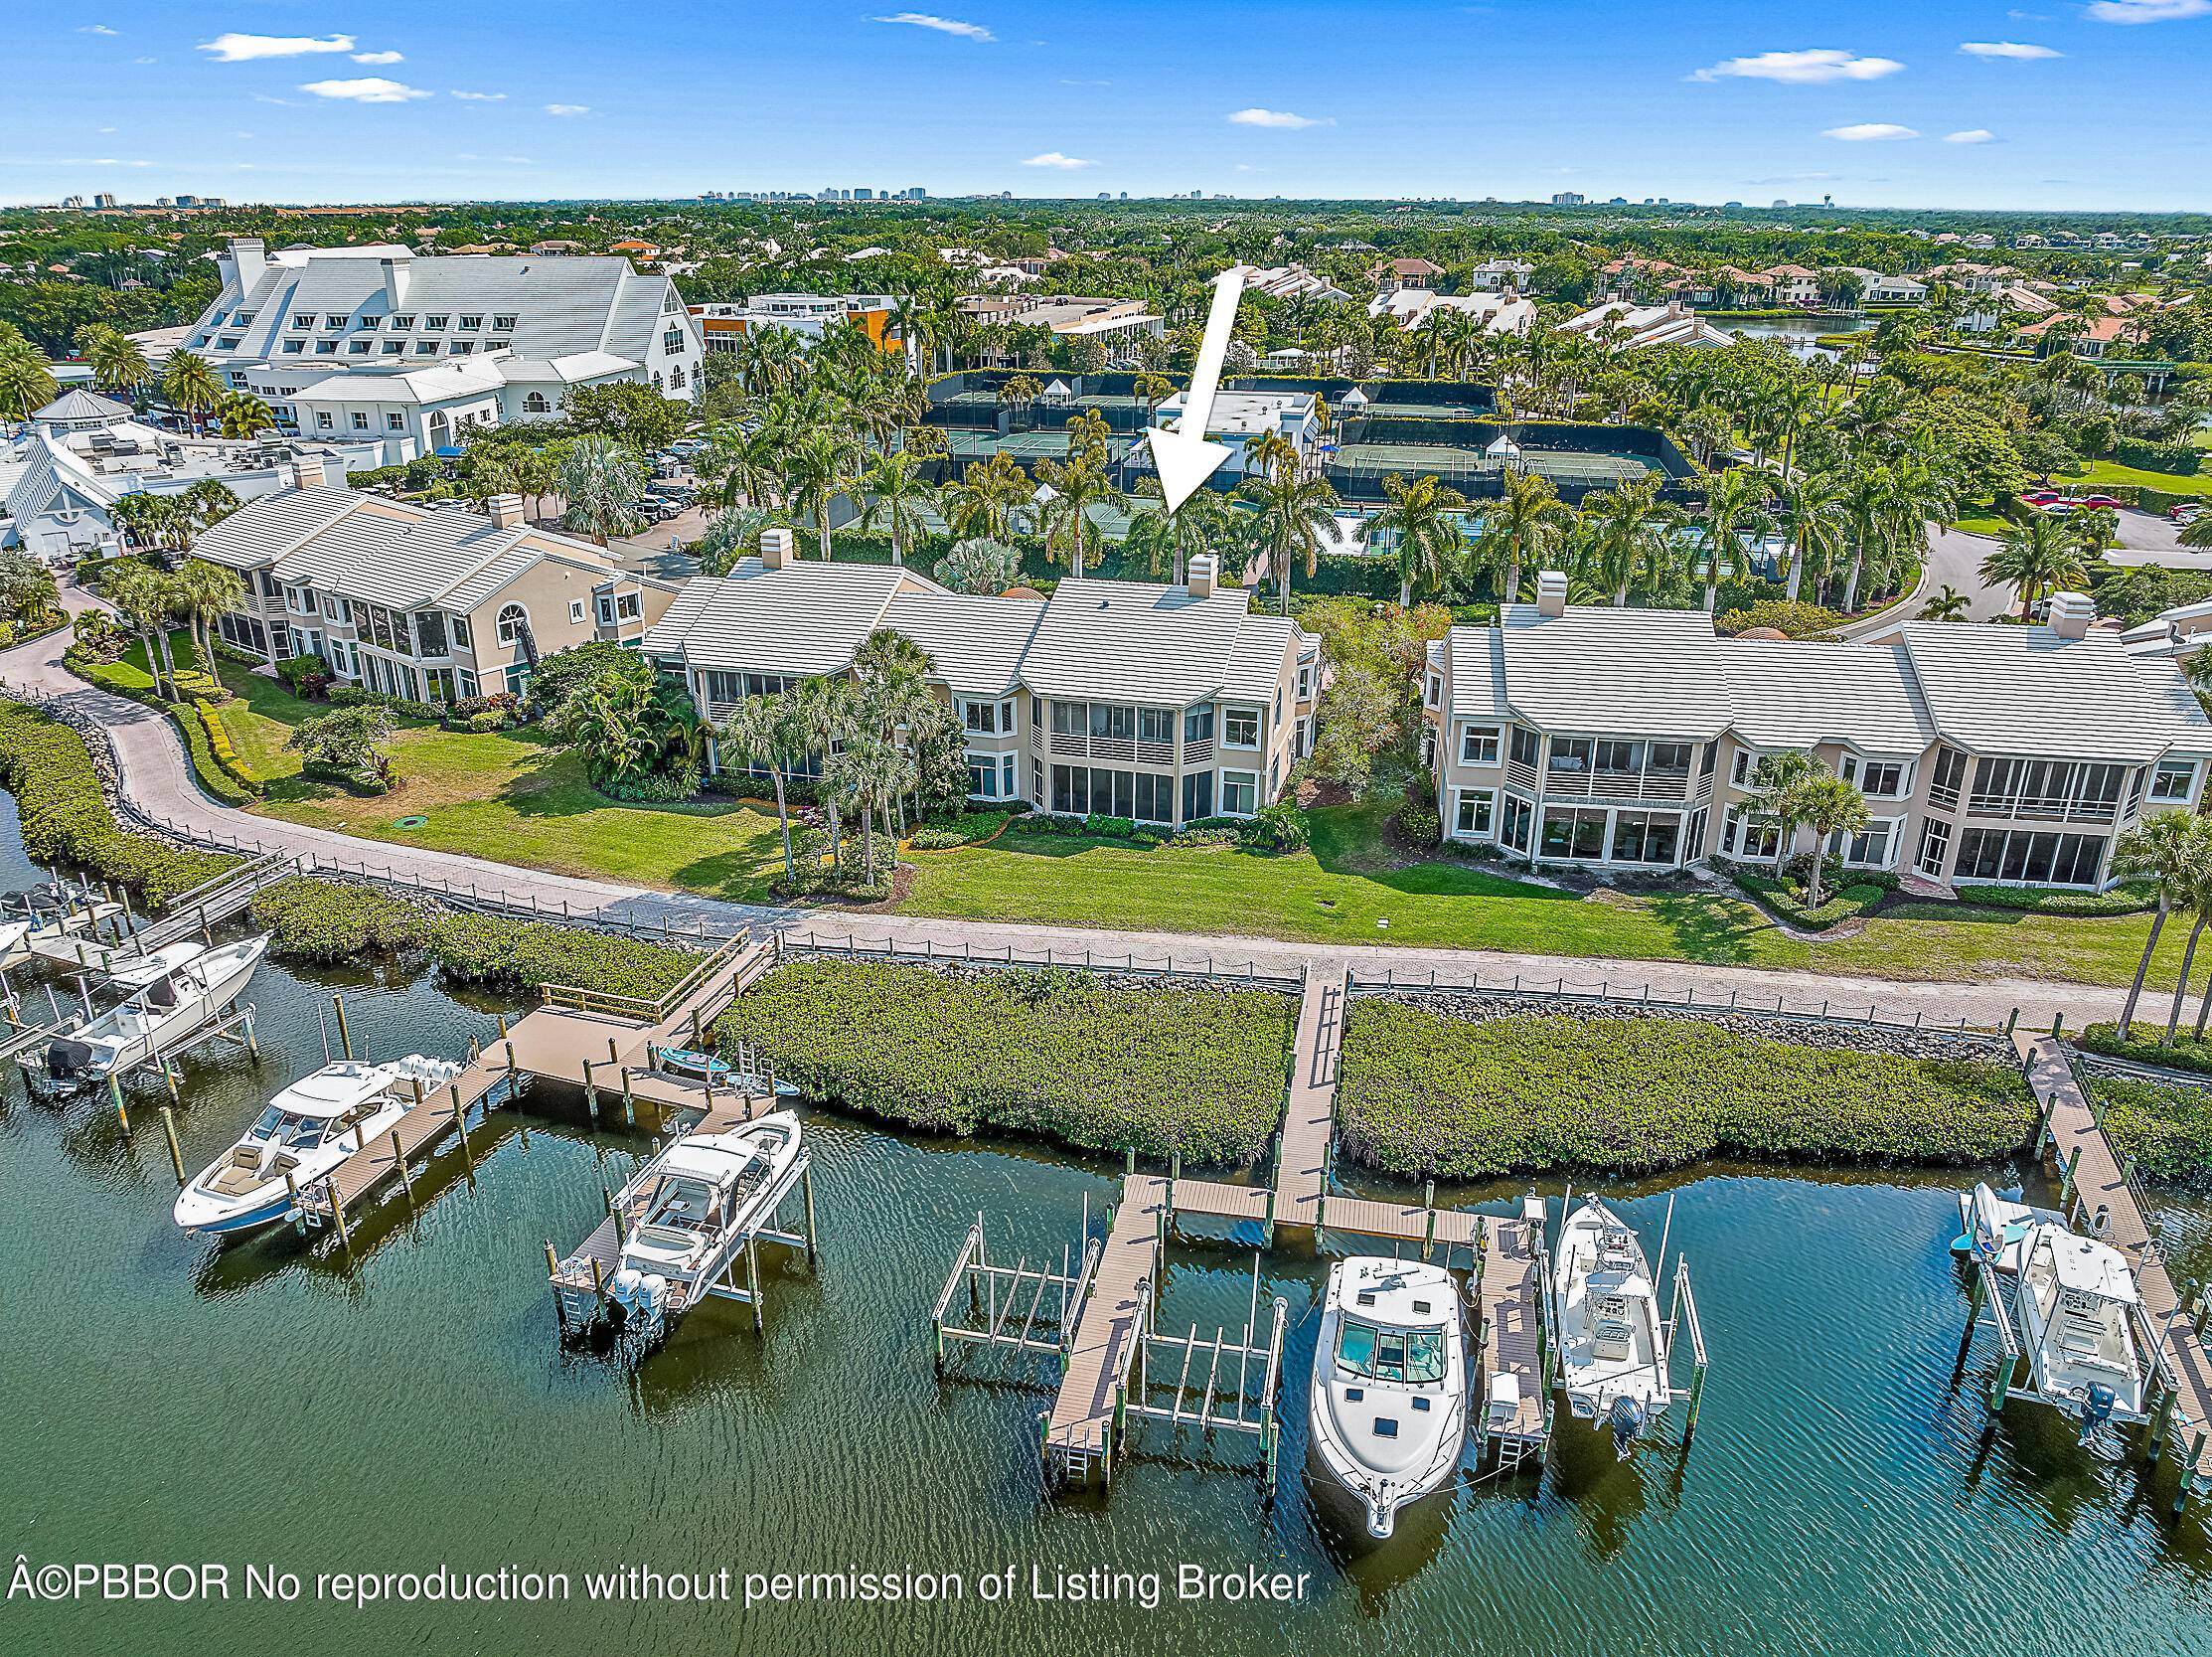 Embrace sophisticated living in this stunning second floor harbor home, beautifully renovated to perfection in the esteemed Admirals Cove.